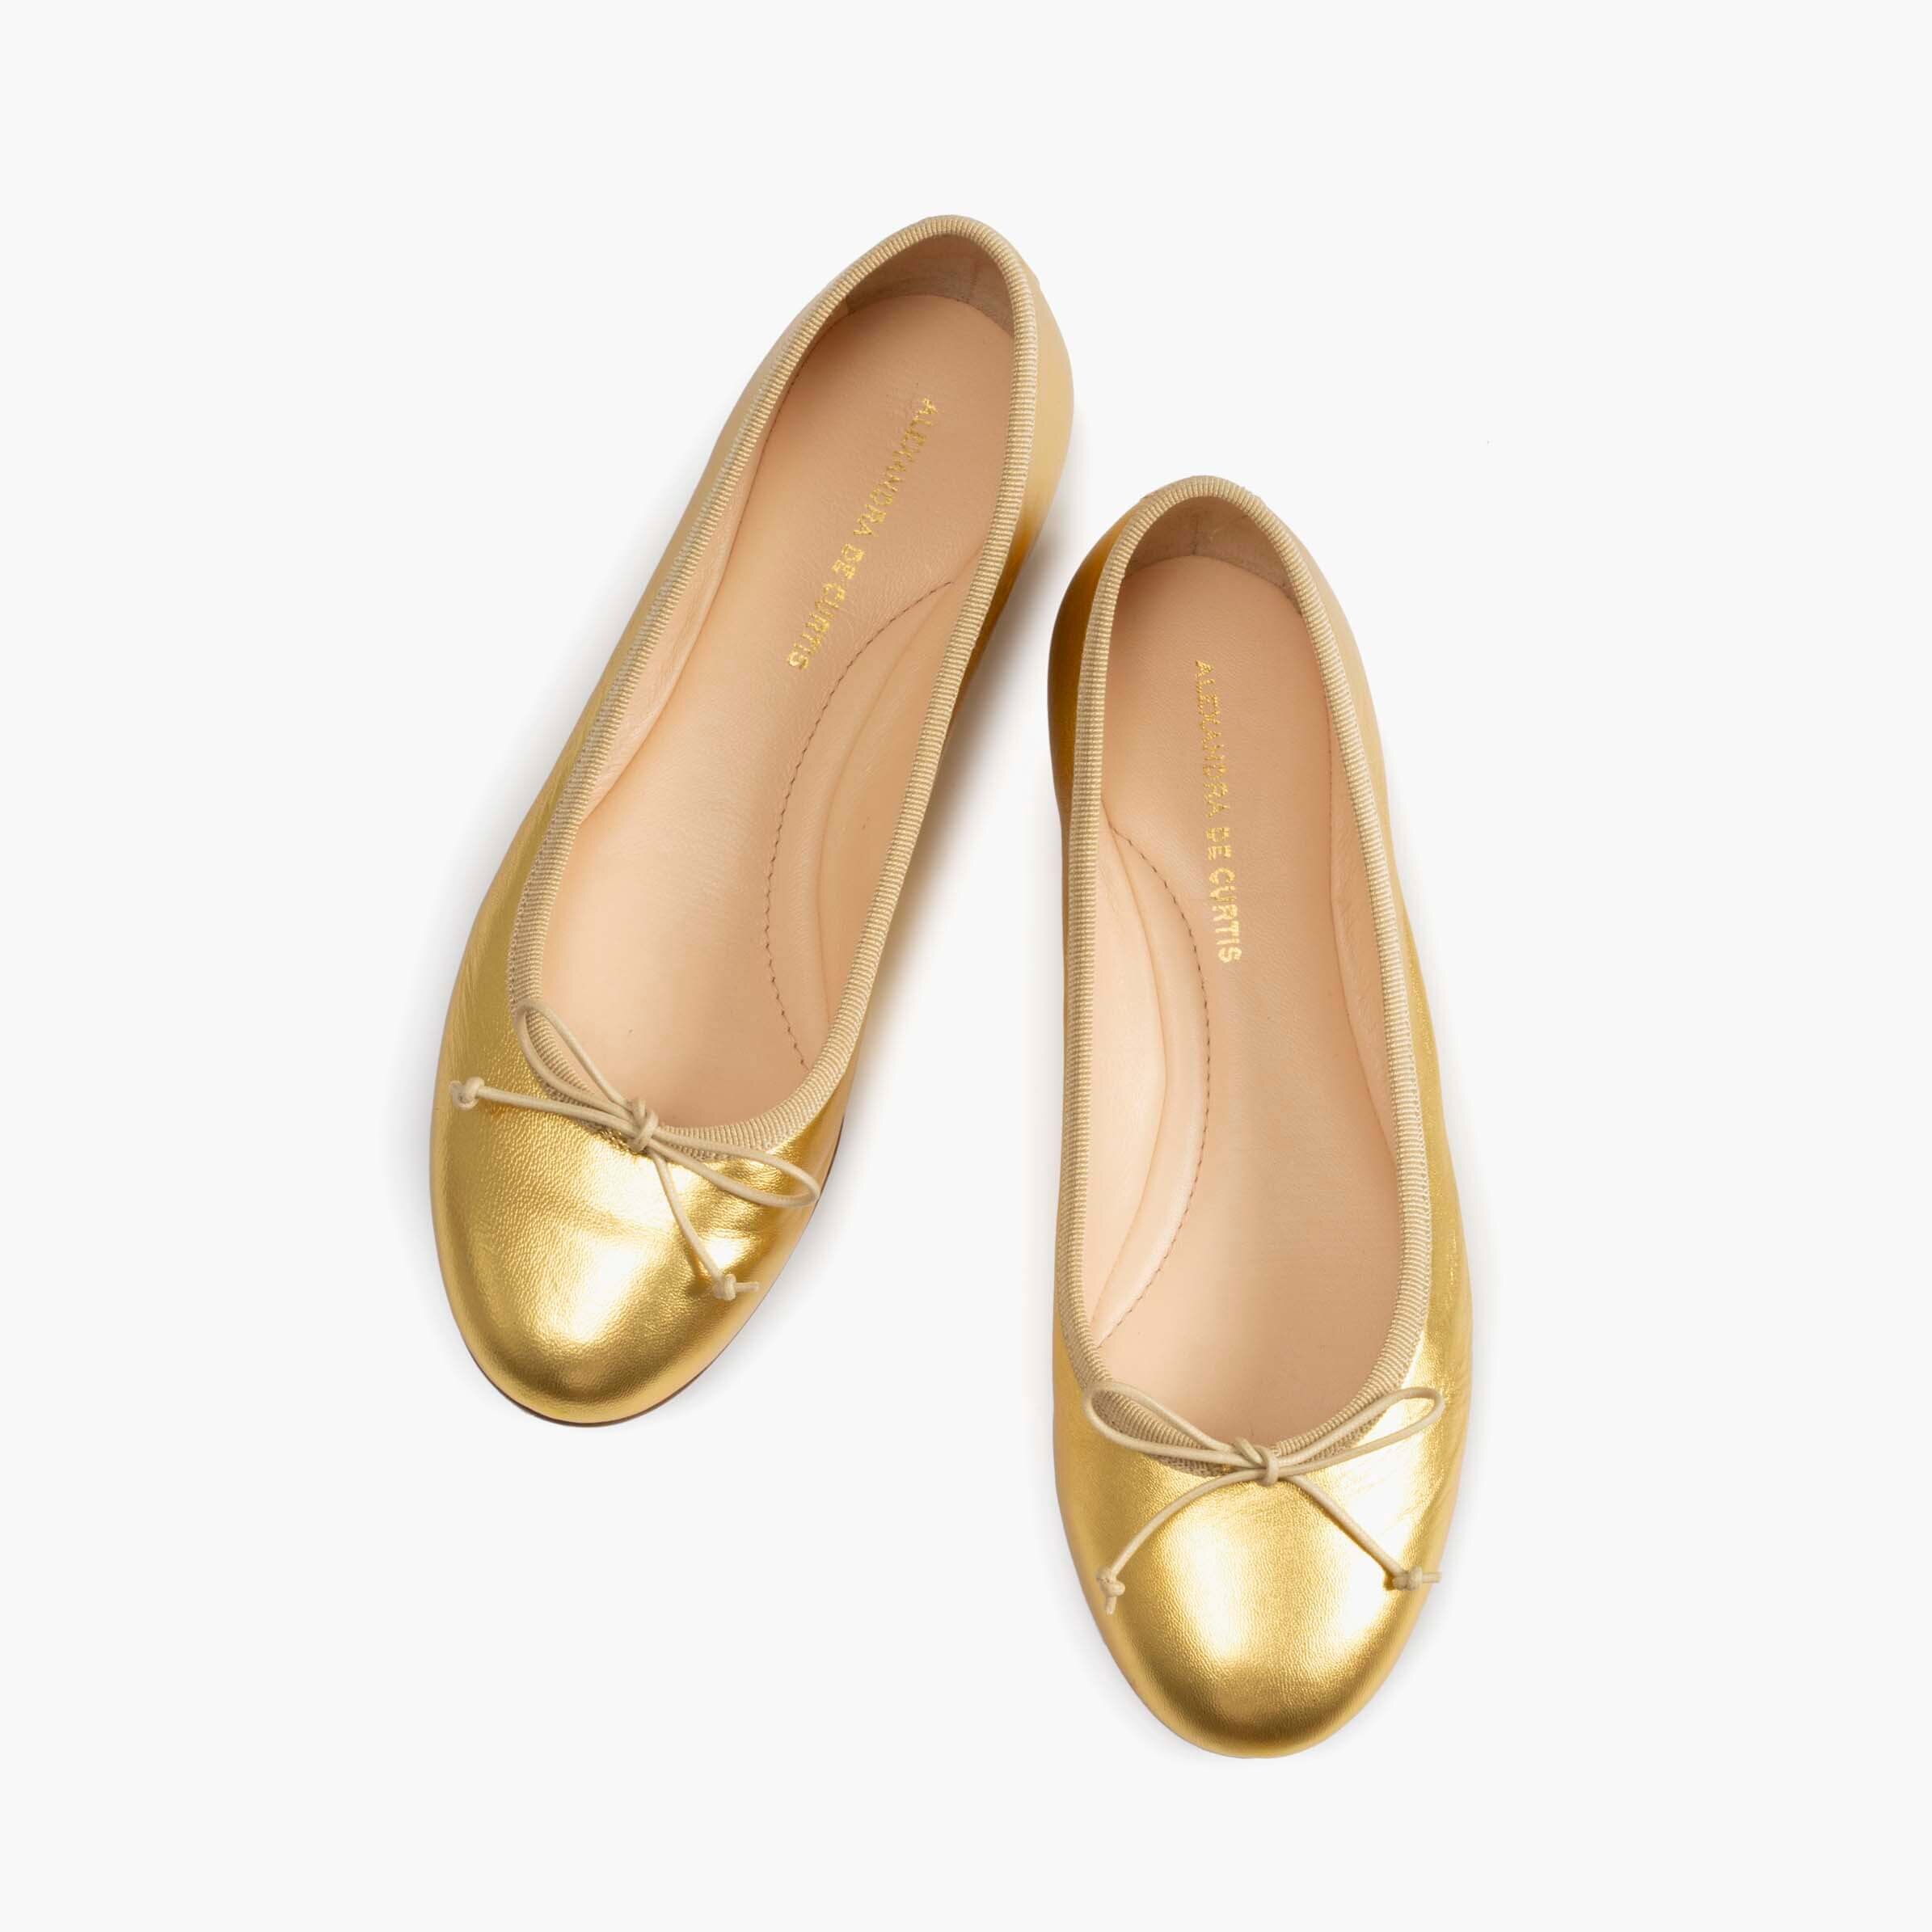 GOLD Leather Ballet Flats/ Women's shoes/ Metallic Gold Leather flats. MAYA Shoes Womens Shoes Slip Ons Ballet Shoes 